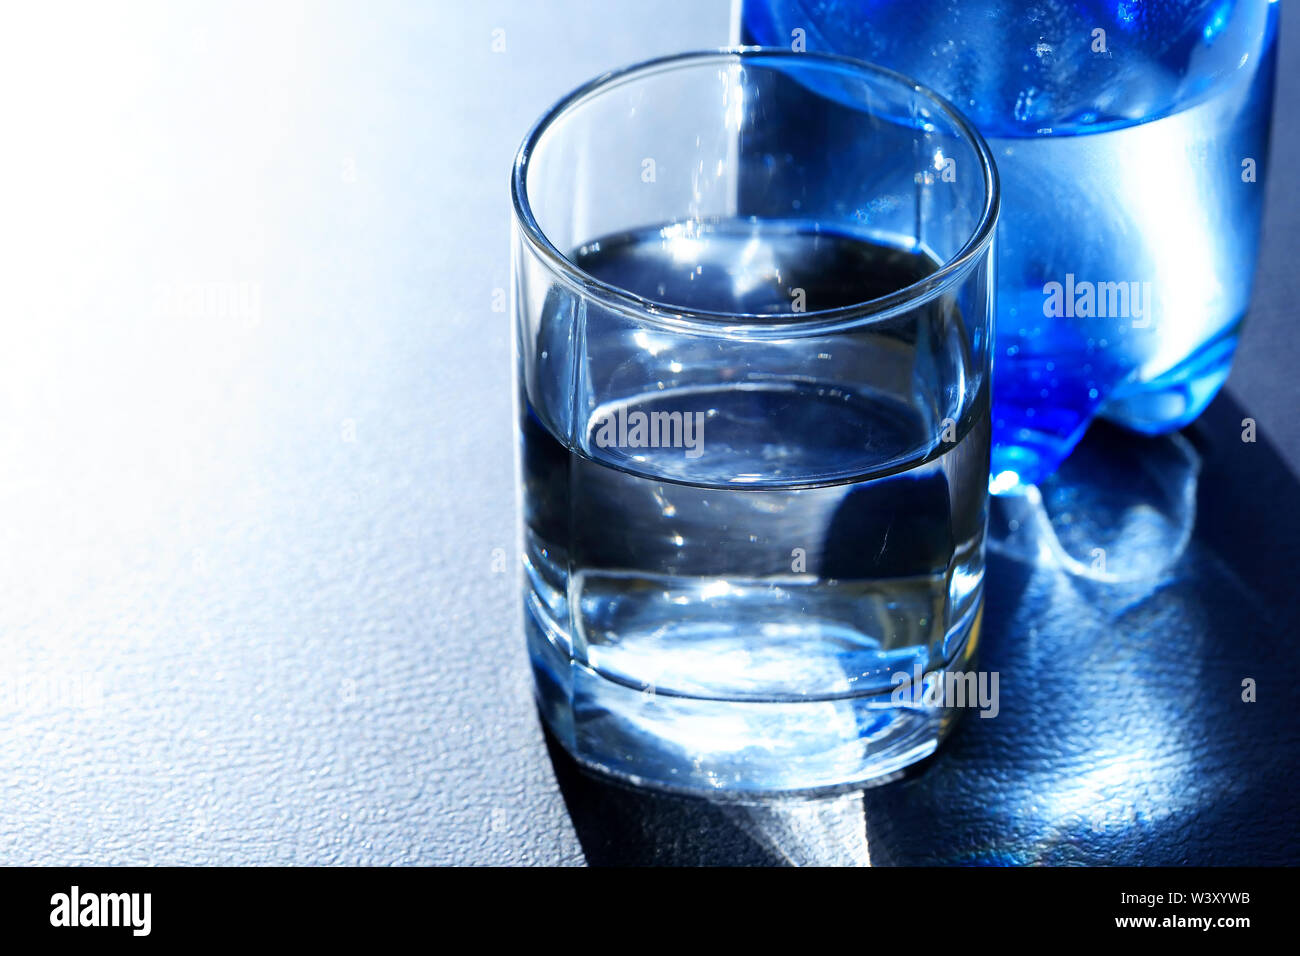 Closeup of glass of mineral water near blue plastic bottle Stock Photo